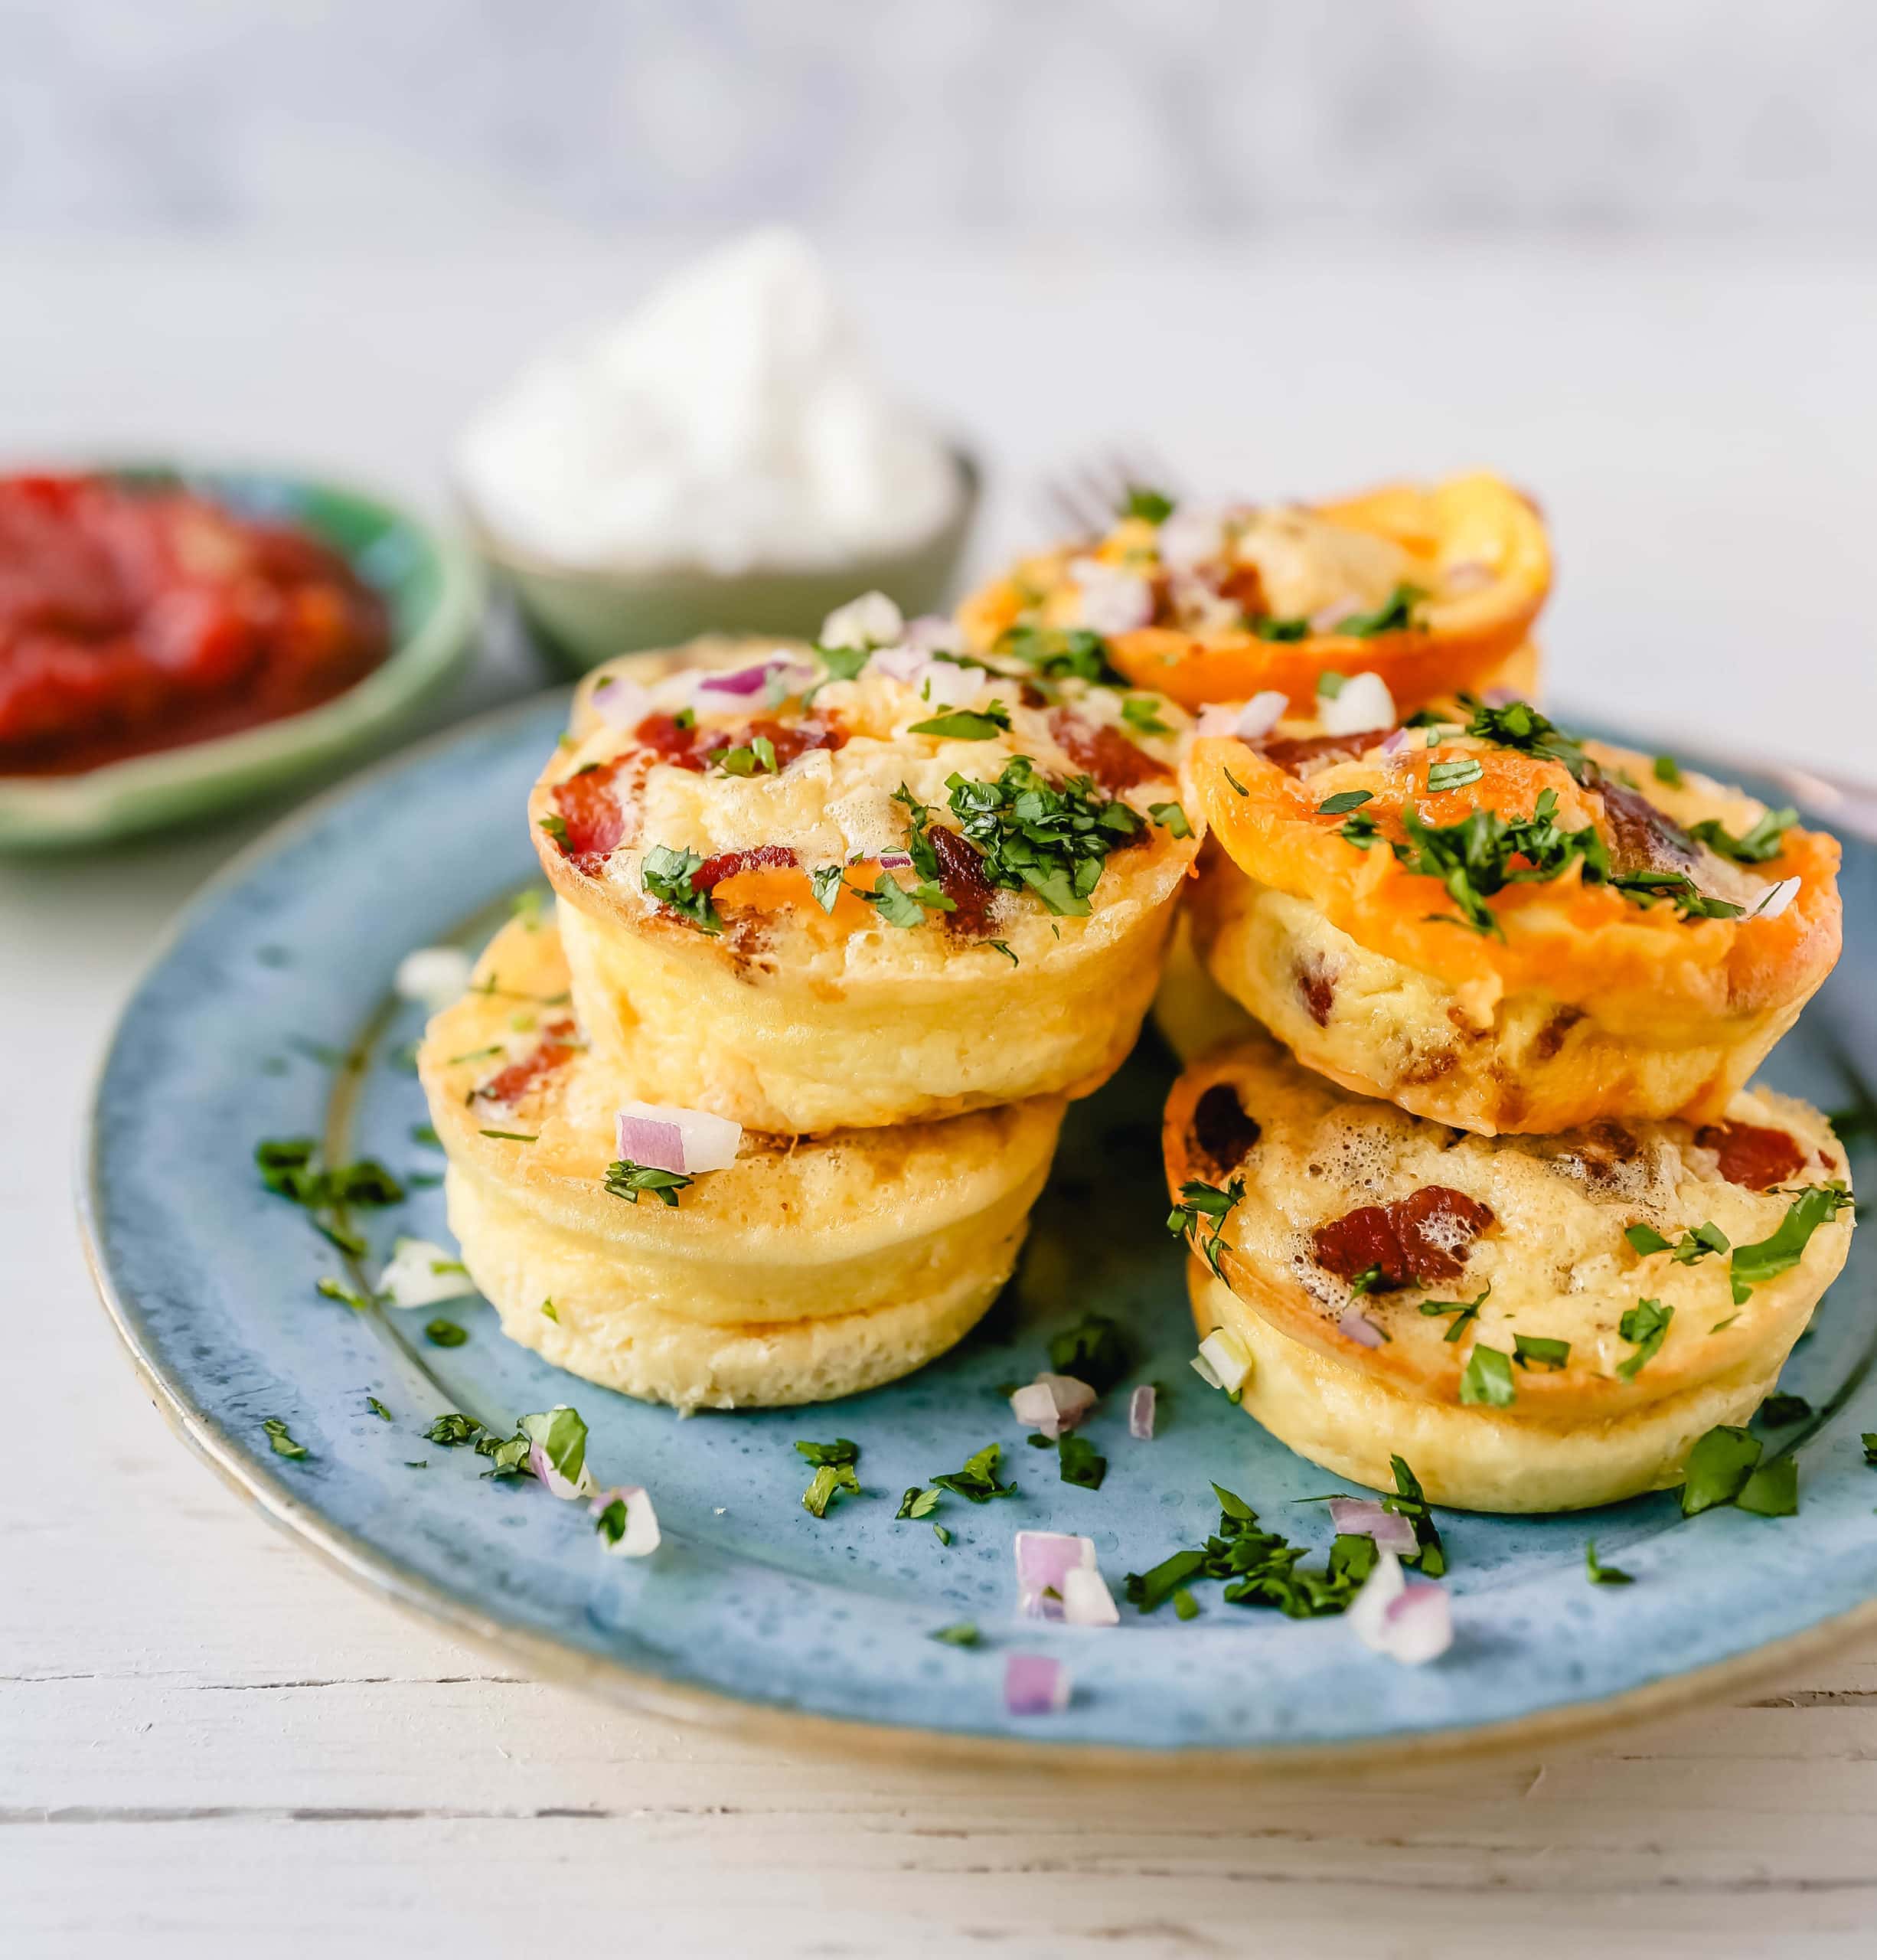 Mini Egg Bacon and Cheese Bites A quick and easy bite-size high-protein and low-carb breakfast. These mini egg bites are the perfect start for your day! www.modernhoney.com #eggbites #eggbaconbites #breakfast